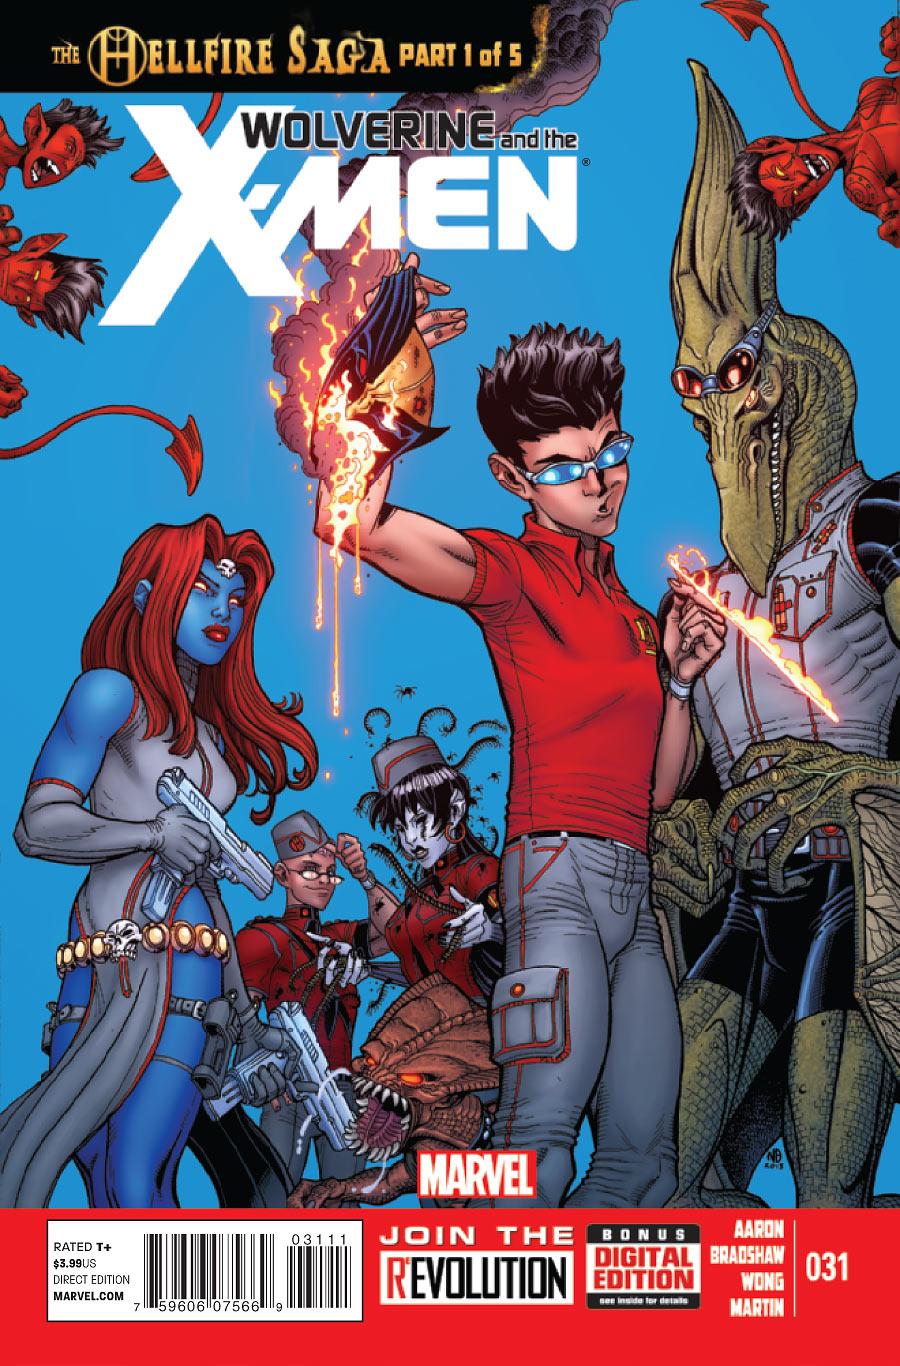 Wolverine and the X-Men Vol. 1 #31